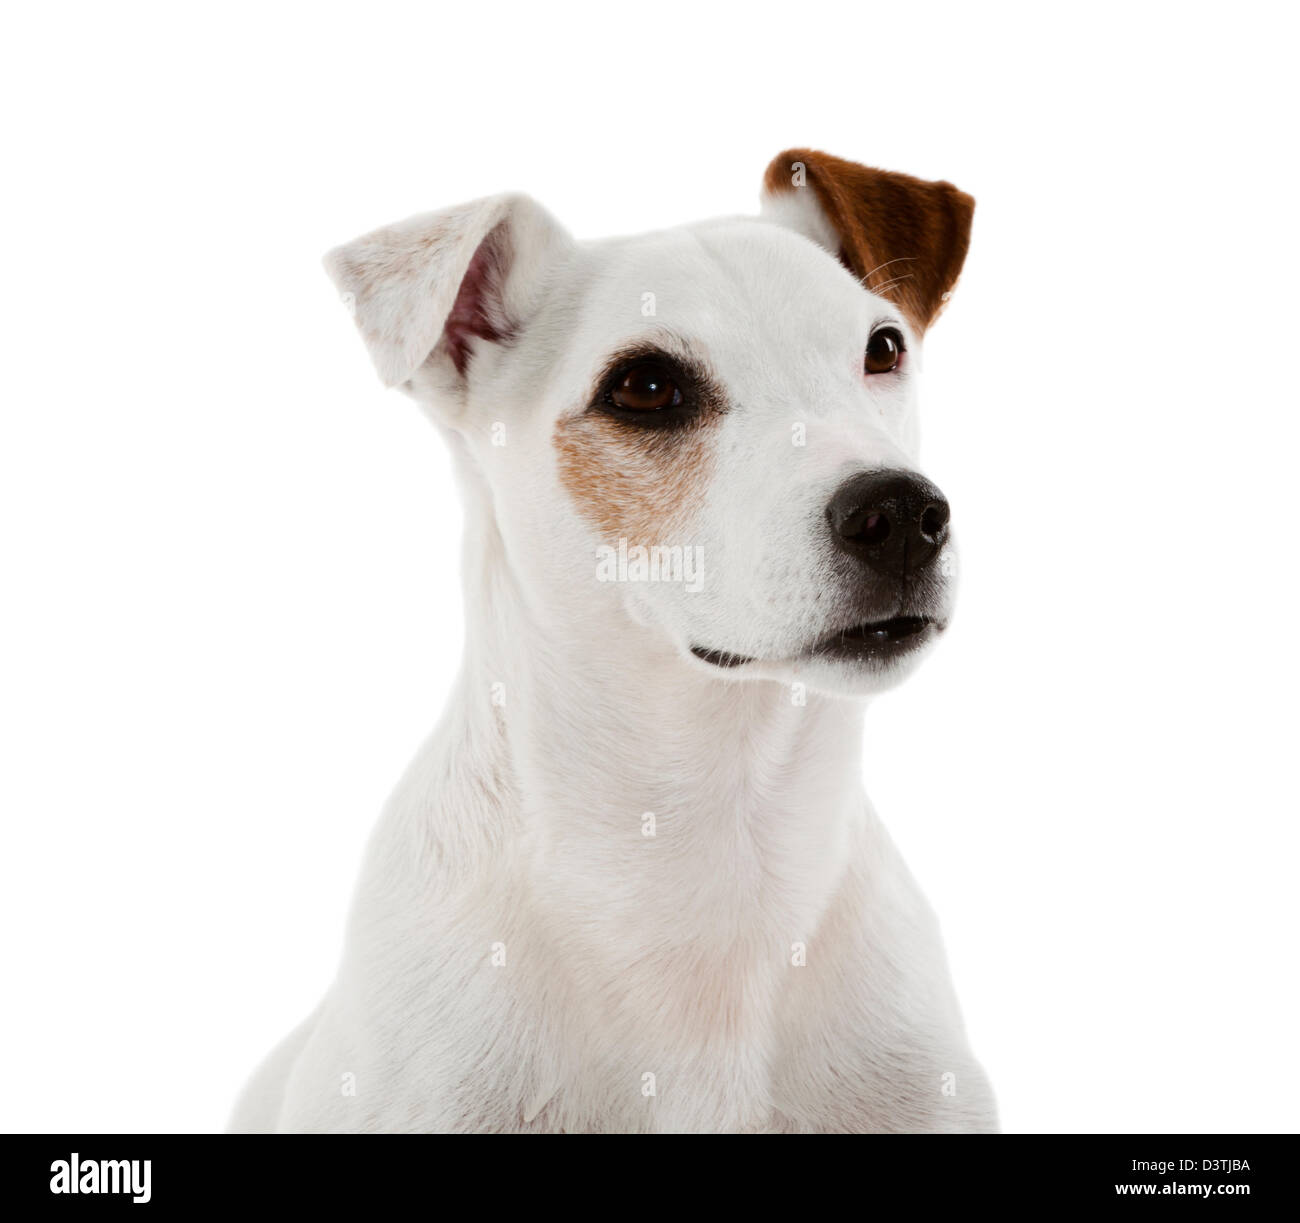 Jack Russell Terrier sitting Stock Photo